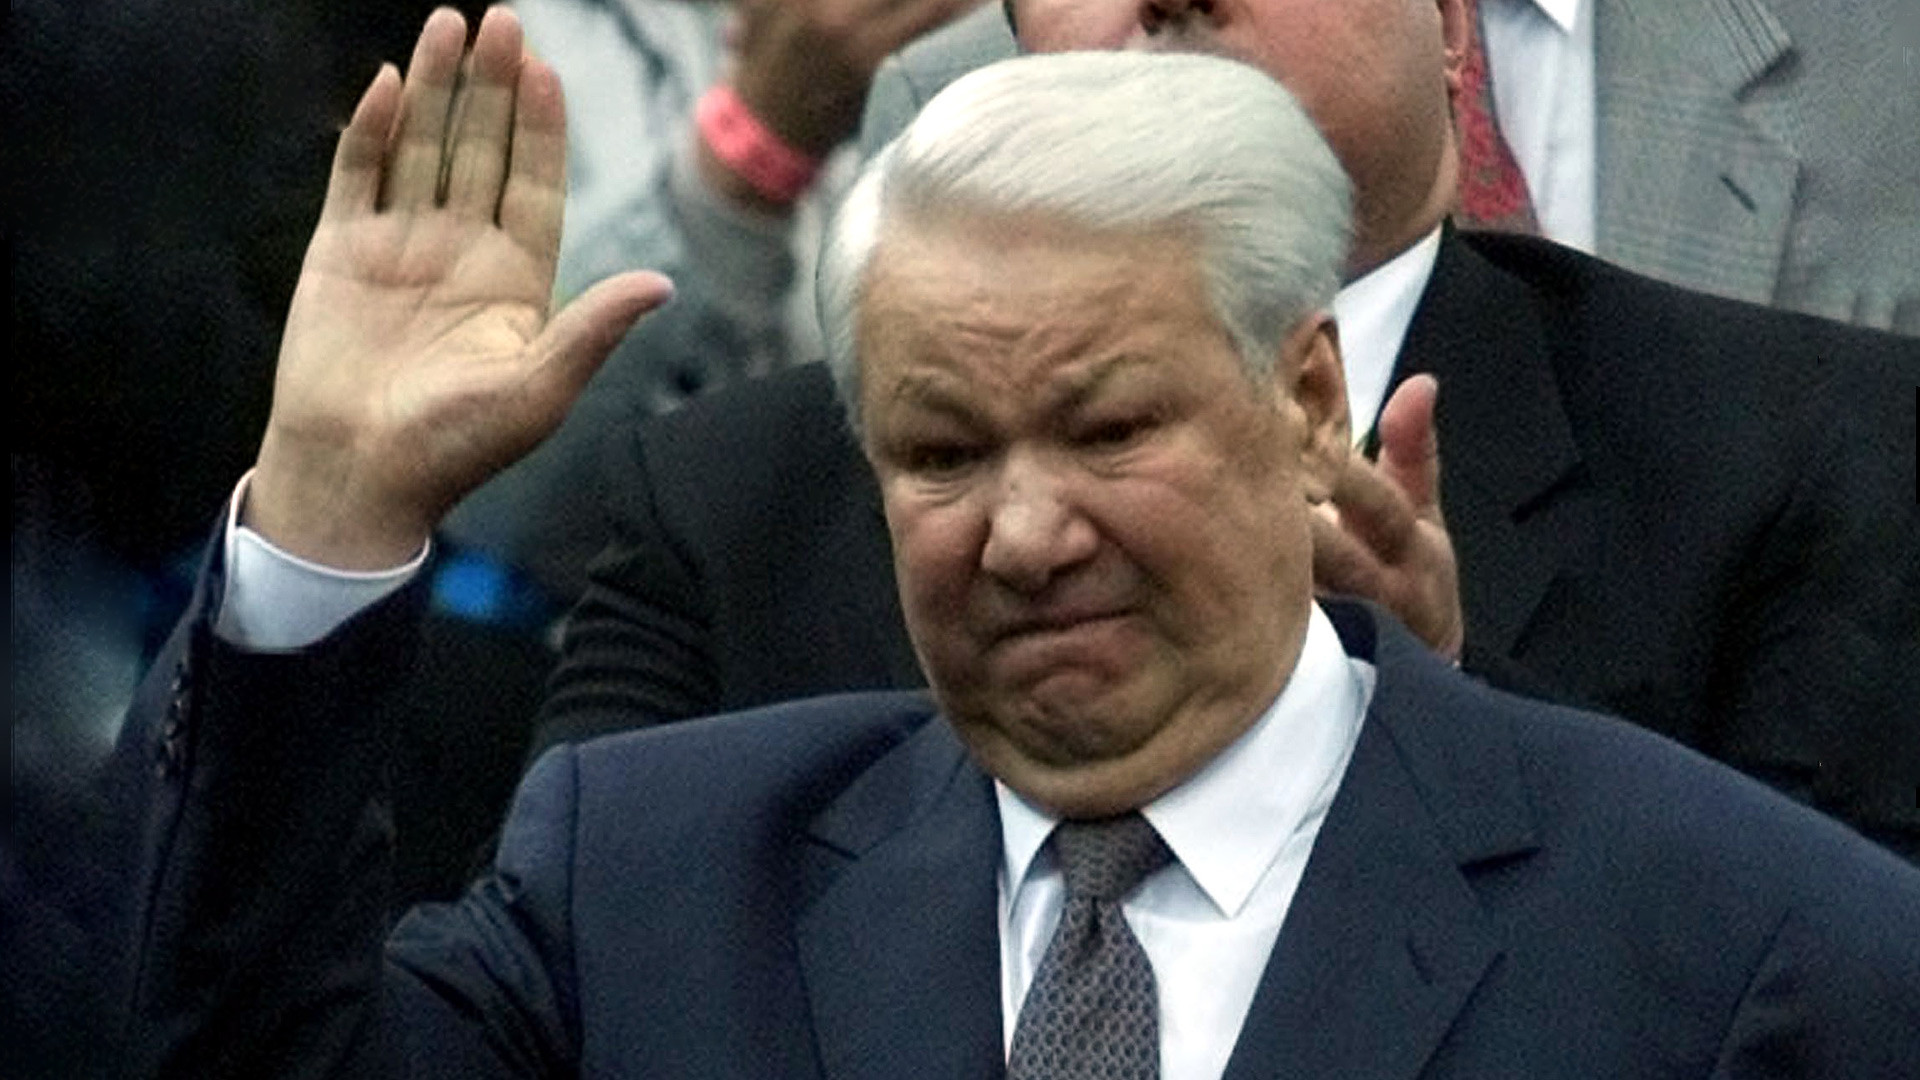 How Russian Parliament tried to impeach President Yeltsin - Russia Beyond